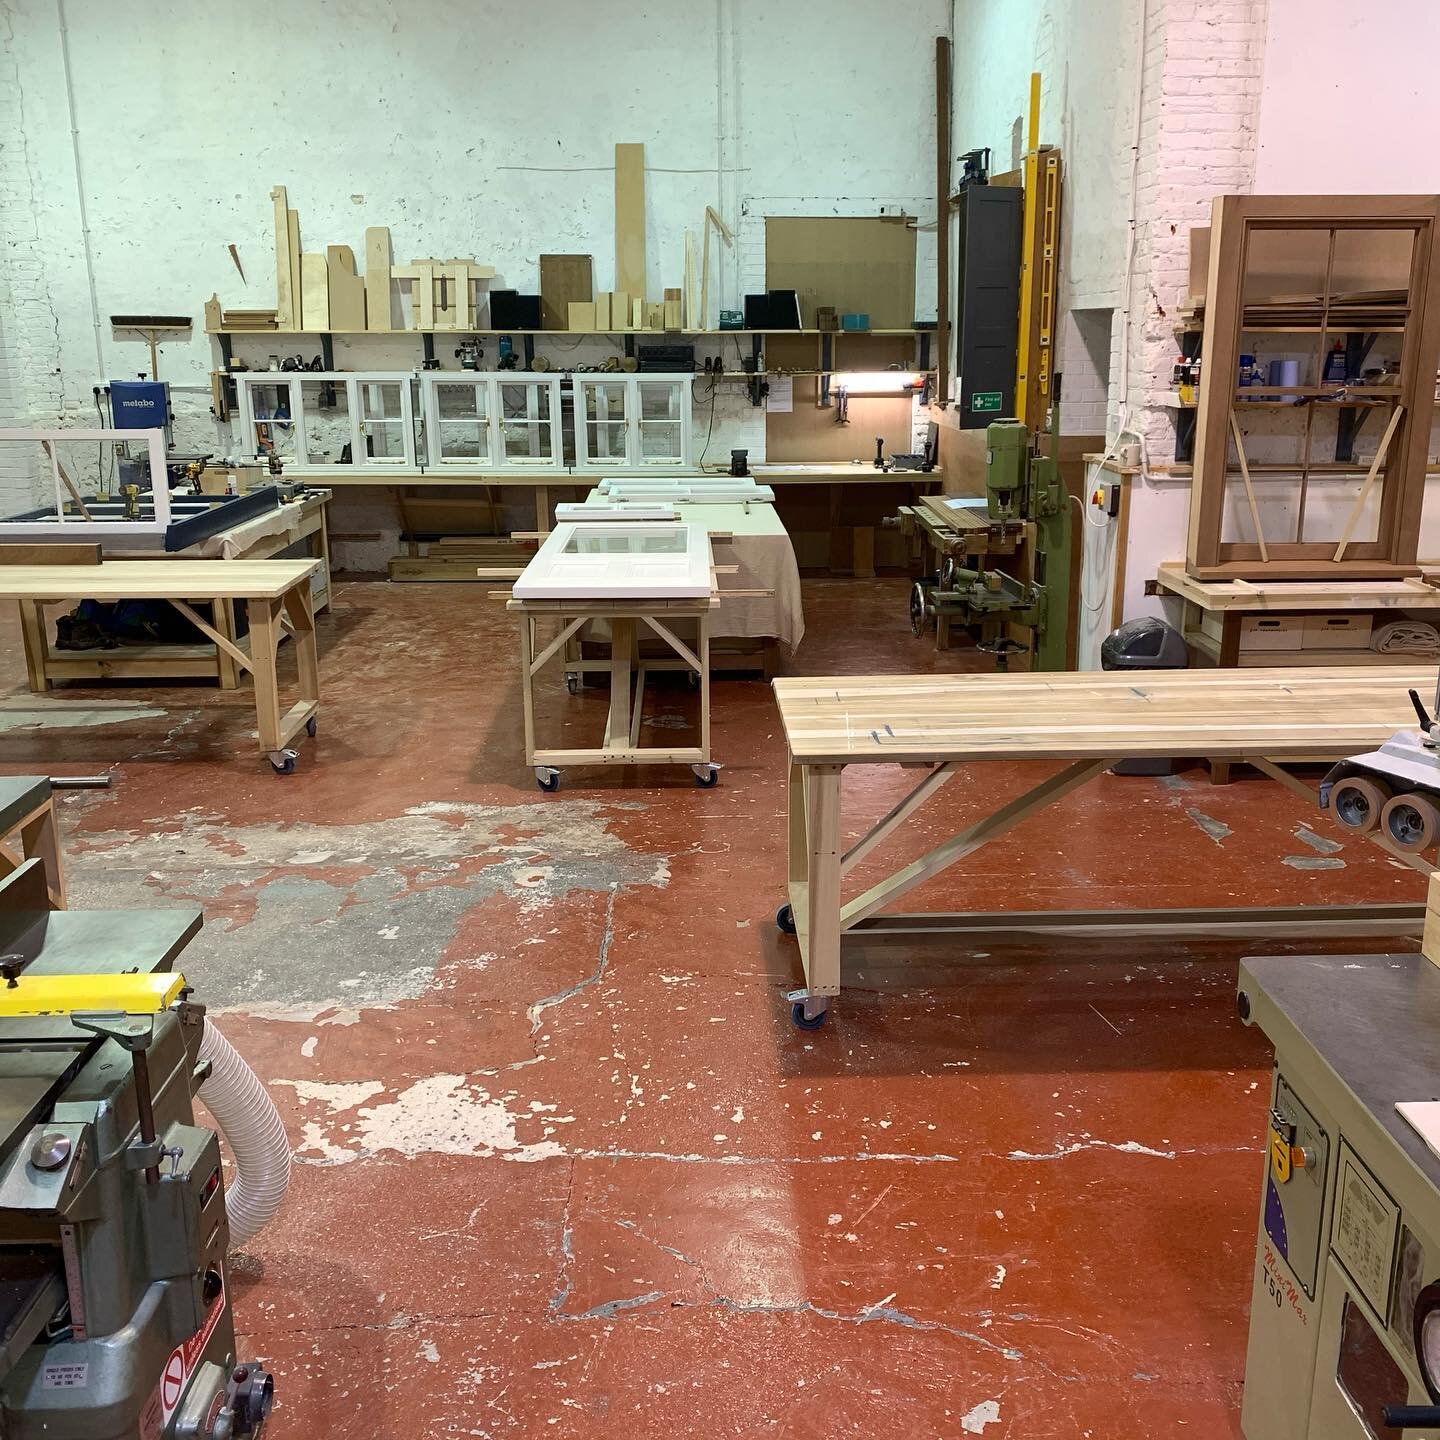 Our new workshop at Bayfield. We moved one year ago from a humble threshing barn, seen in the next picture. New workshop set up with the brilliant bench joiner @aidanmpinkham  and finisher @dantungate.